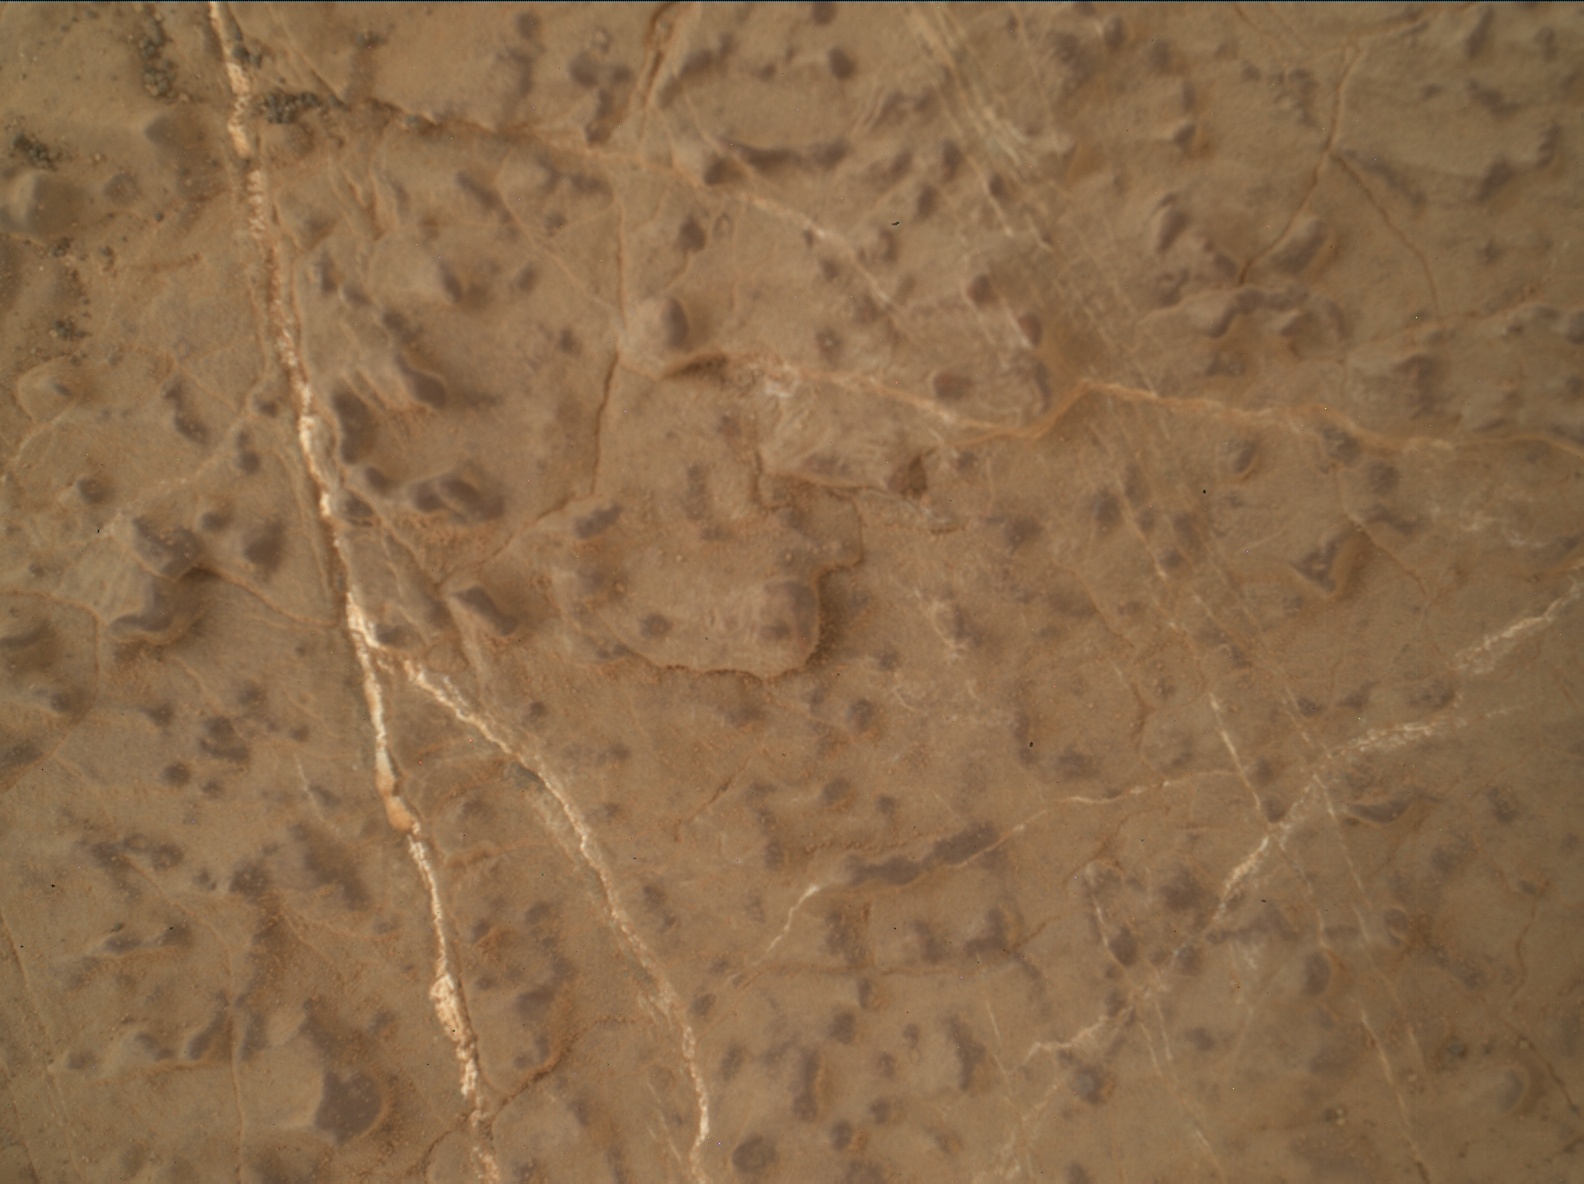 Nasa's Mars rover Curiosity acquired this image using its Mars Hand Lens Imager (MAHLI) on Sol 3034